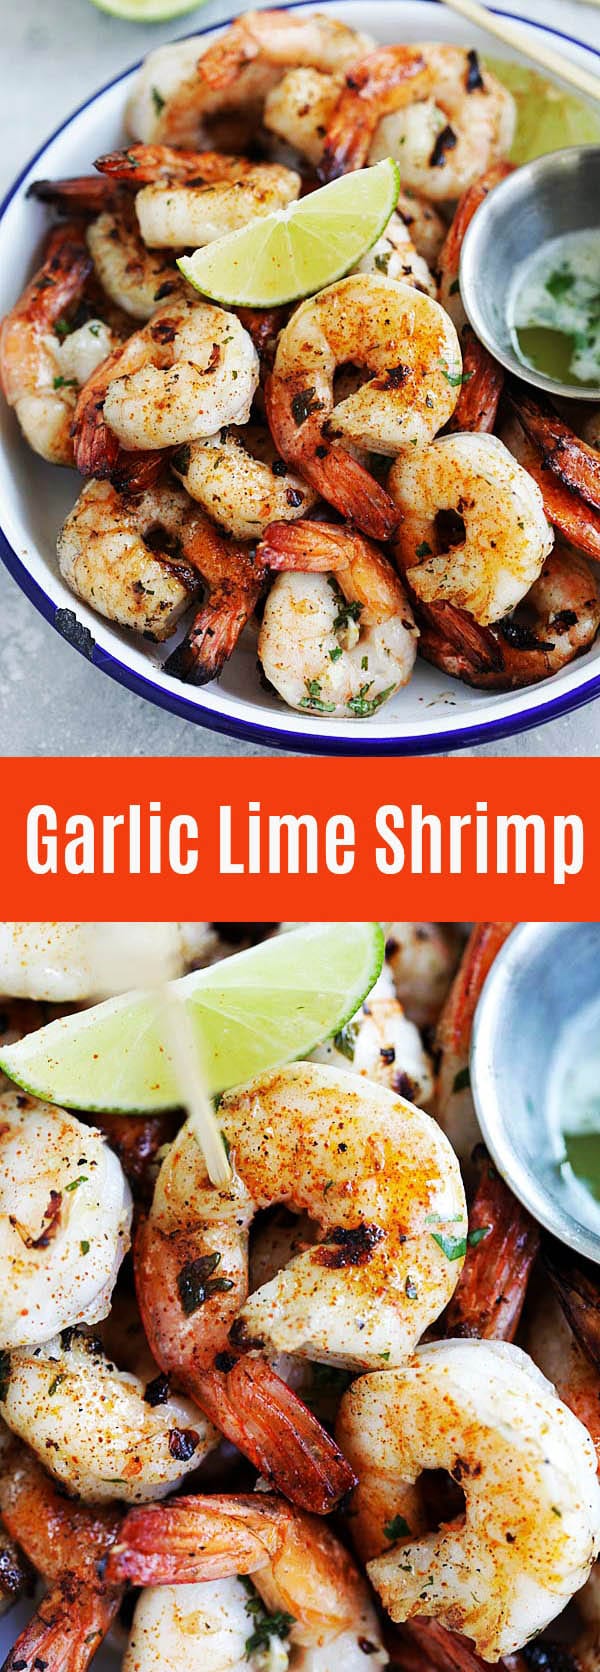 Garlic Lime Shrimp – easy shrimp recipe with garlic, butter and lime juice. Grill them or cook on a grill pan for the best shrimp dish ever | rasamalaysia.com